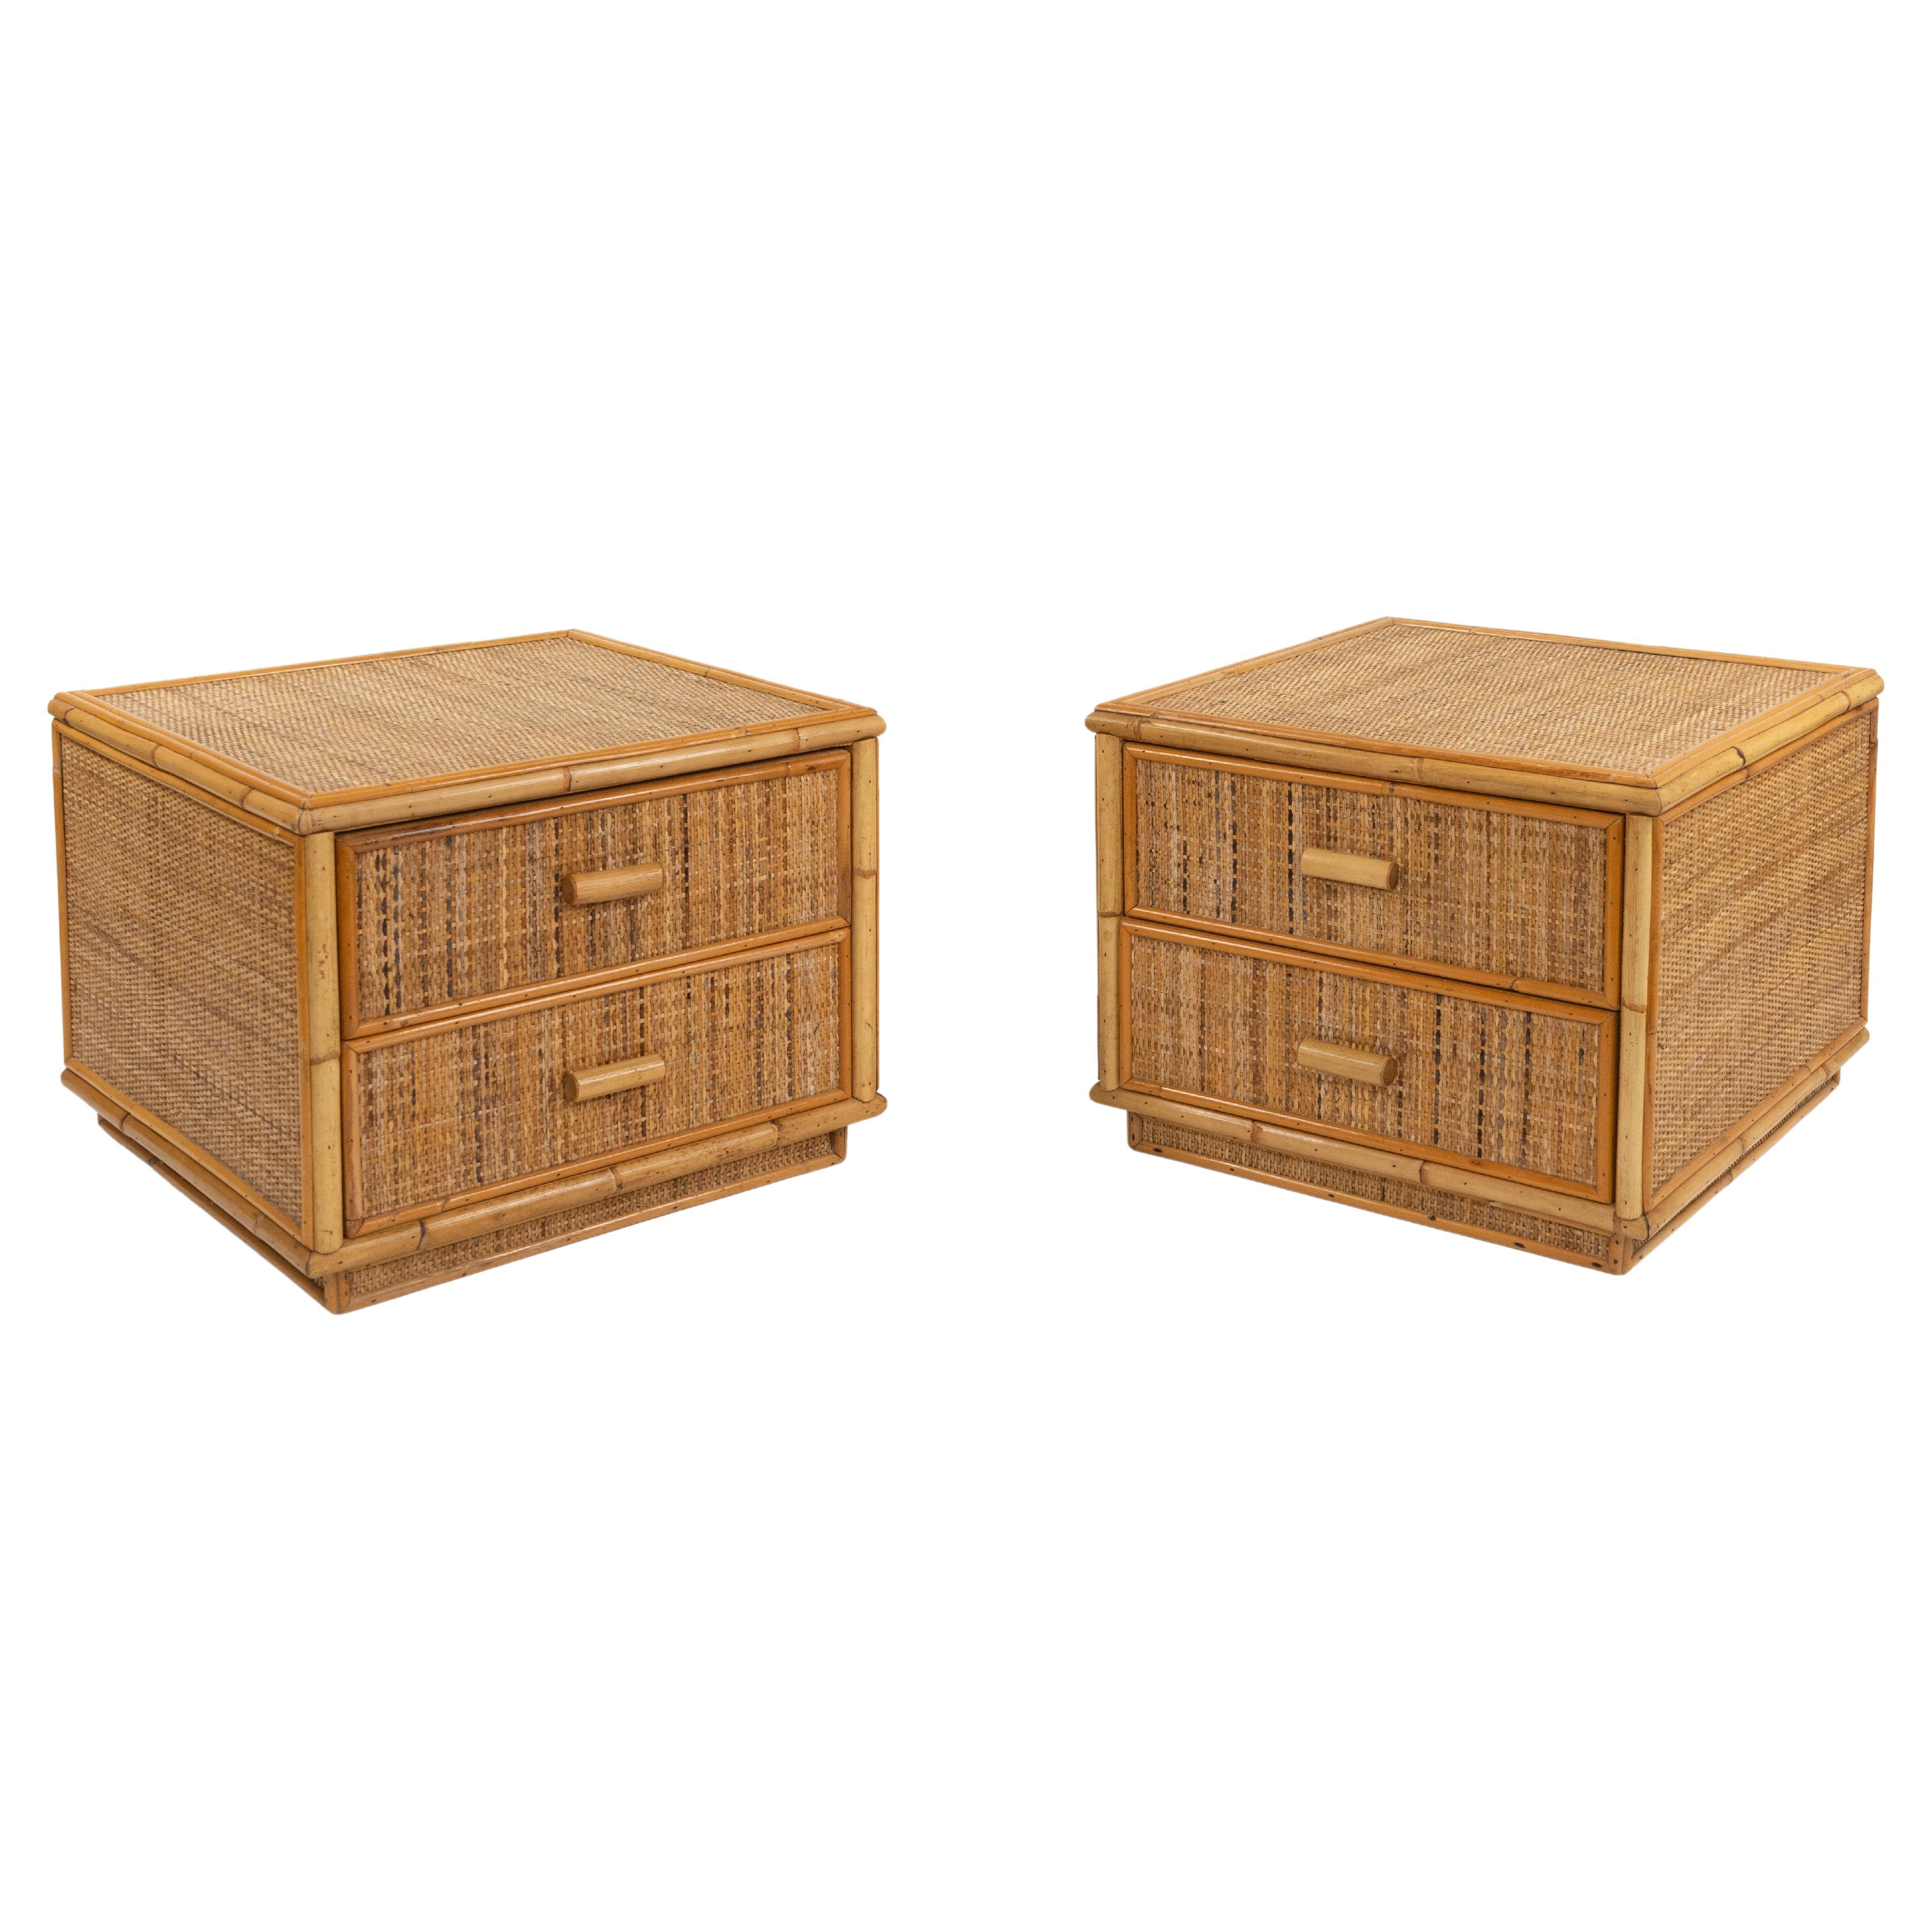 Bamboo and Rattan Pair of Bedside Tables Nightstands Dal Vera Style, Italy 1970s